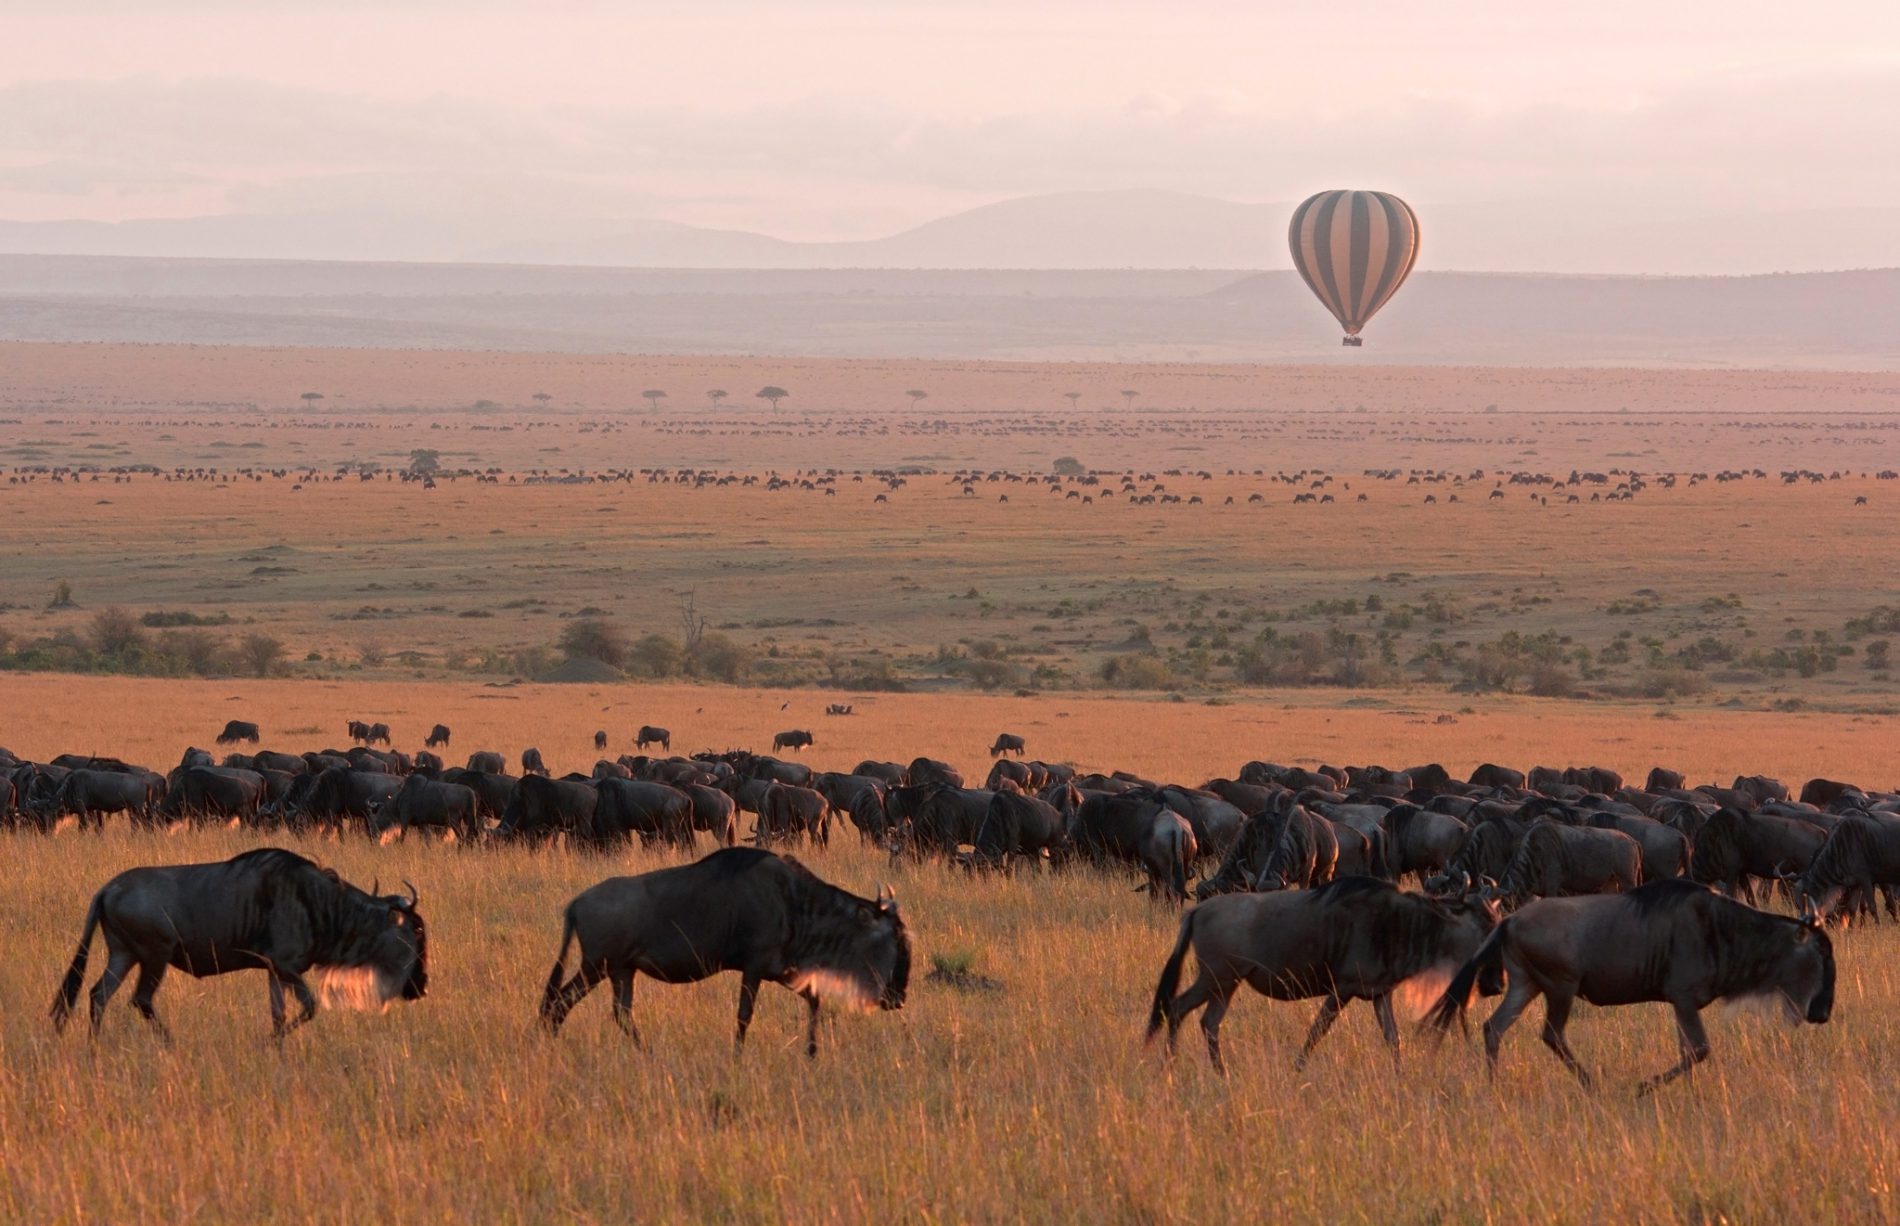 Hot air balloon over the Great Wildebeest Migration